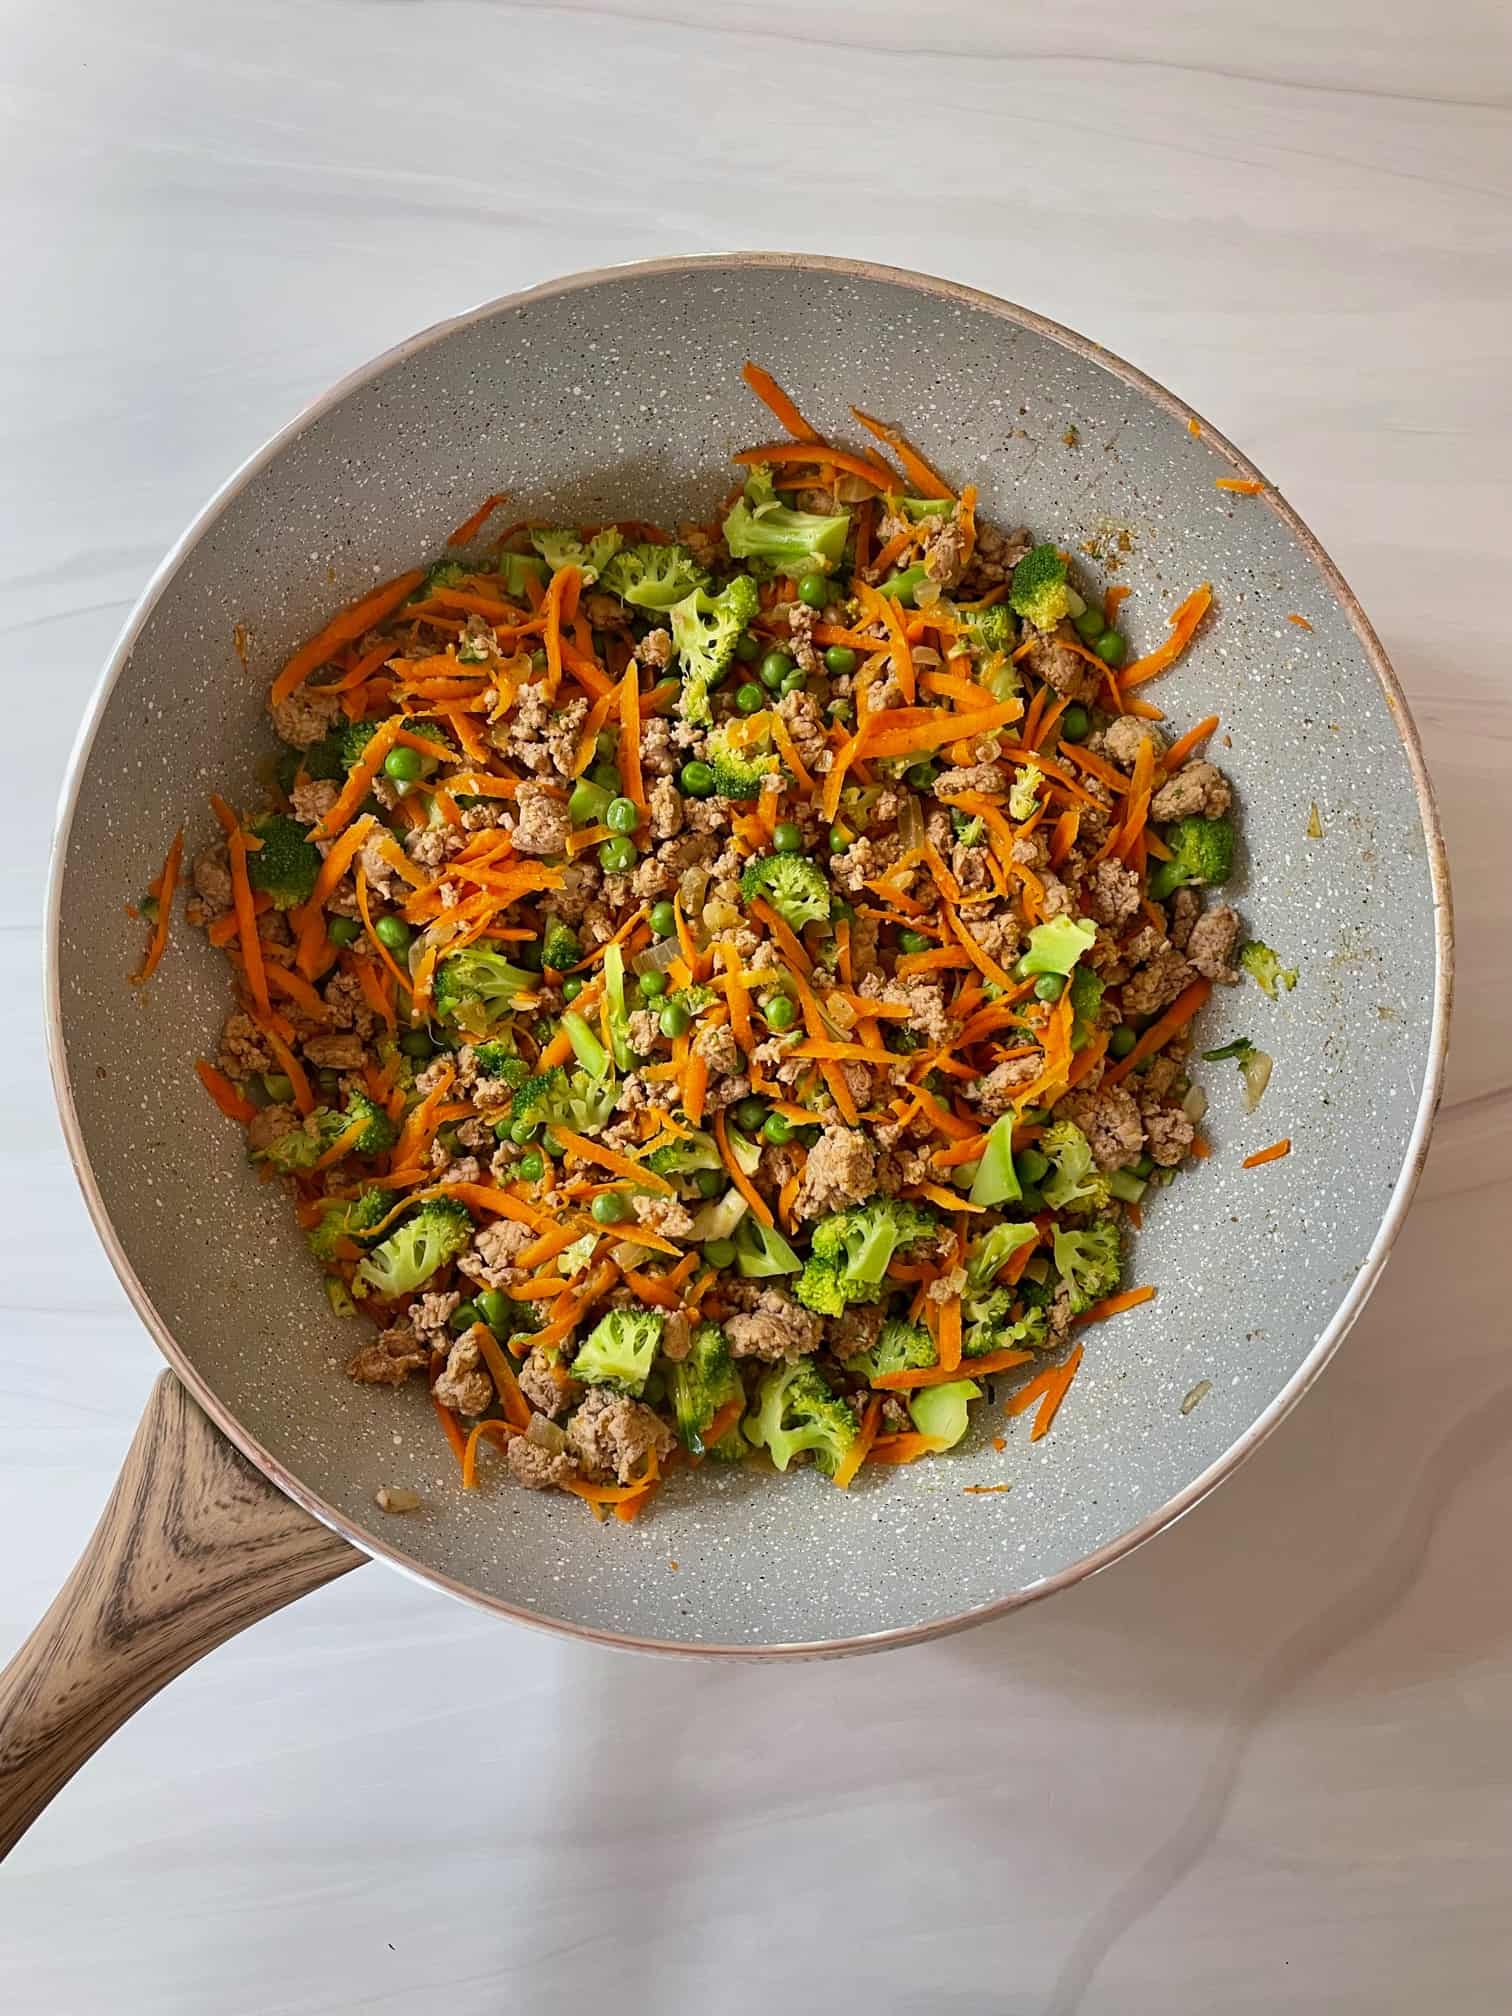 Ground turkey, shredded carrots, chopped broccoli, peas, onions and garlic in a large frying pan.